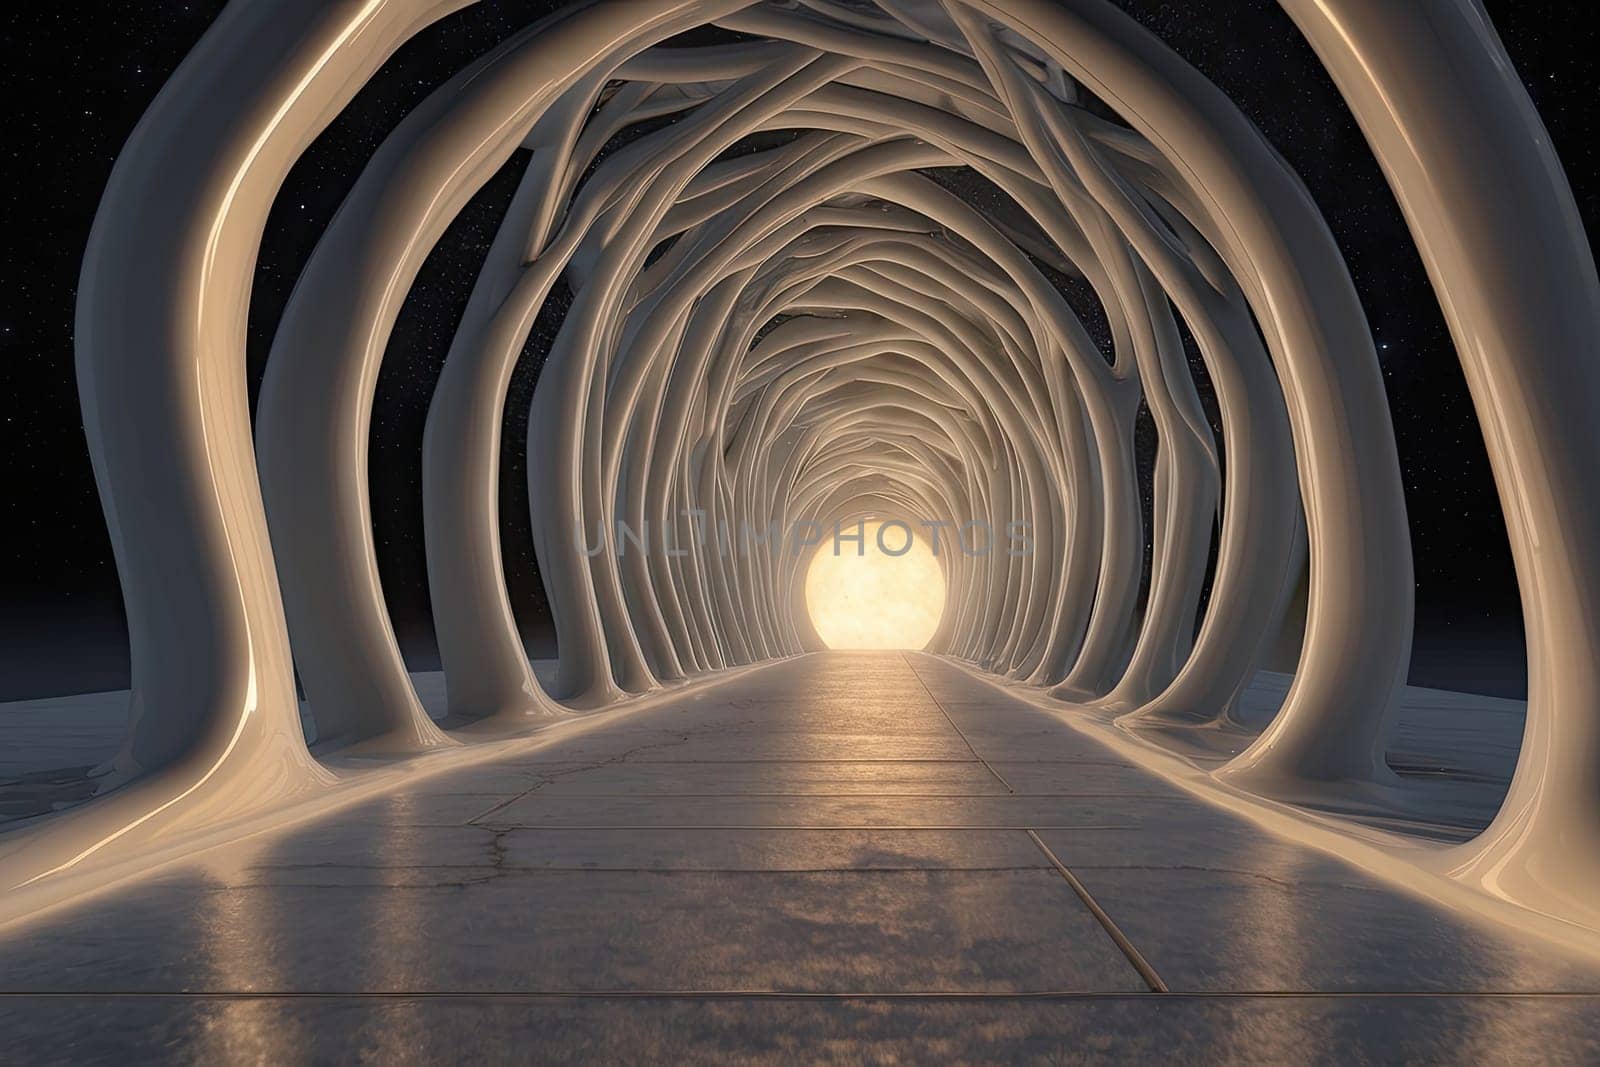 Light at the end of the intertwined tunnel by applesstock